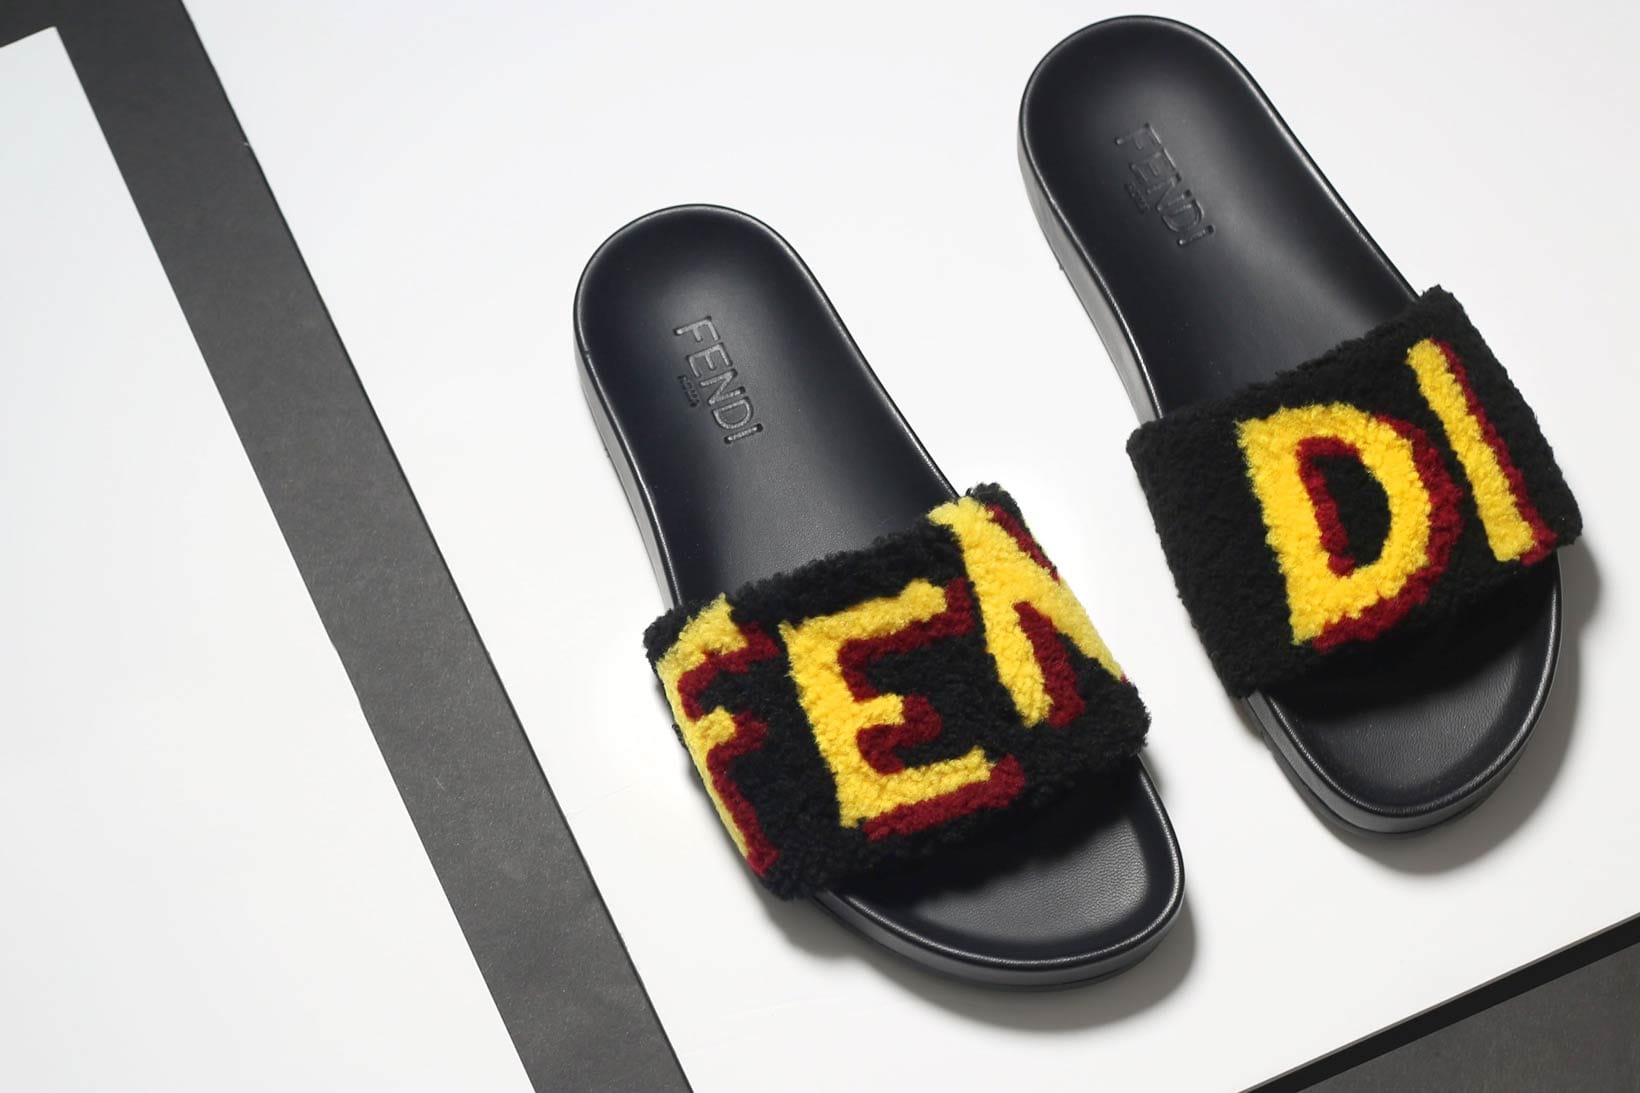 off white slides black and yellow